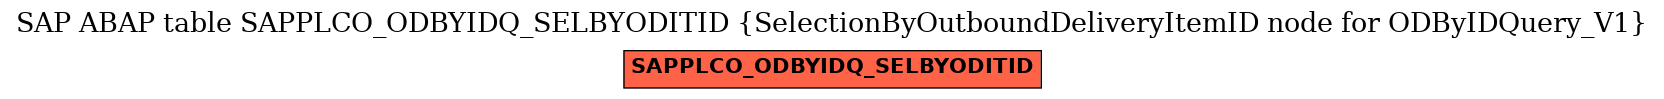 E-R Diagram for table SAPPLCO_ODBYIDQ_SELBYODITID (SelectionByOutboundDeliveryItemID node for ODByIDQuery_V1)